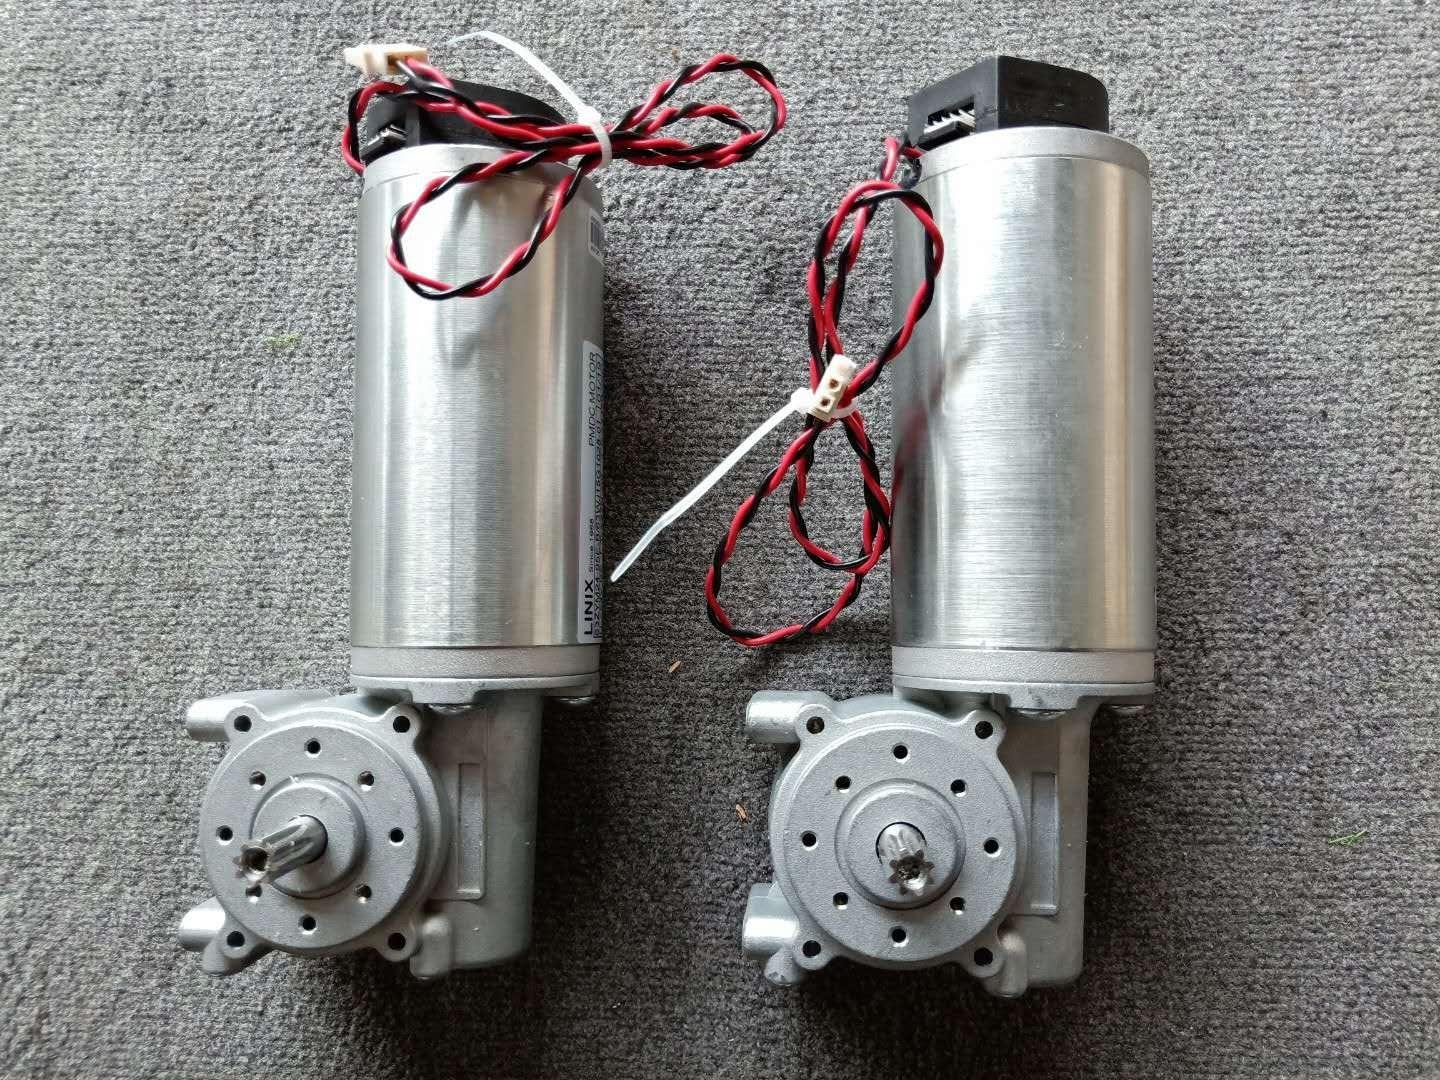 Special dc motor for automatic door and Rail transit